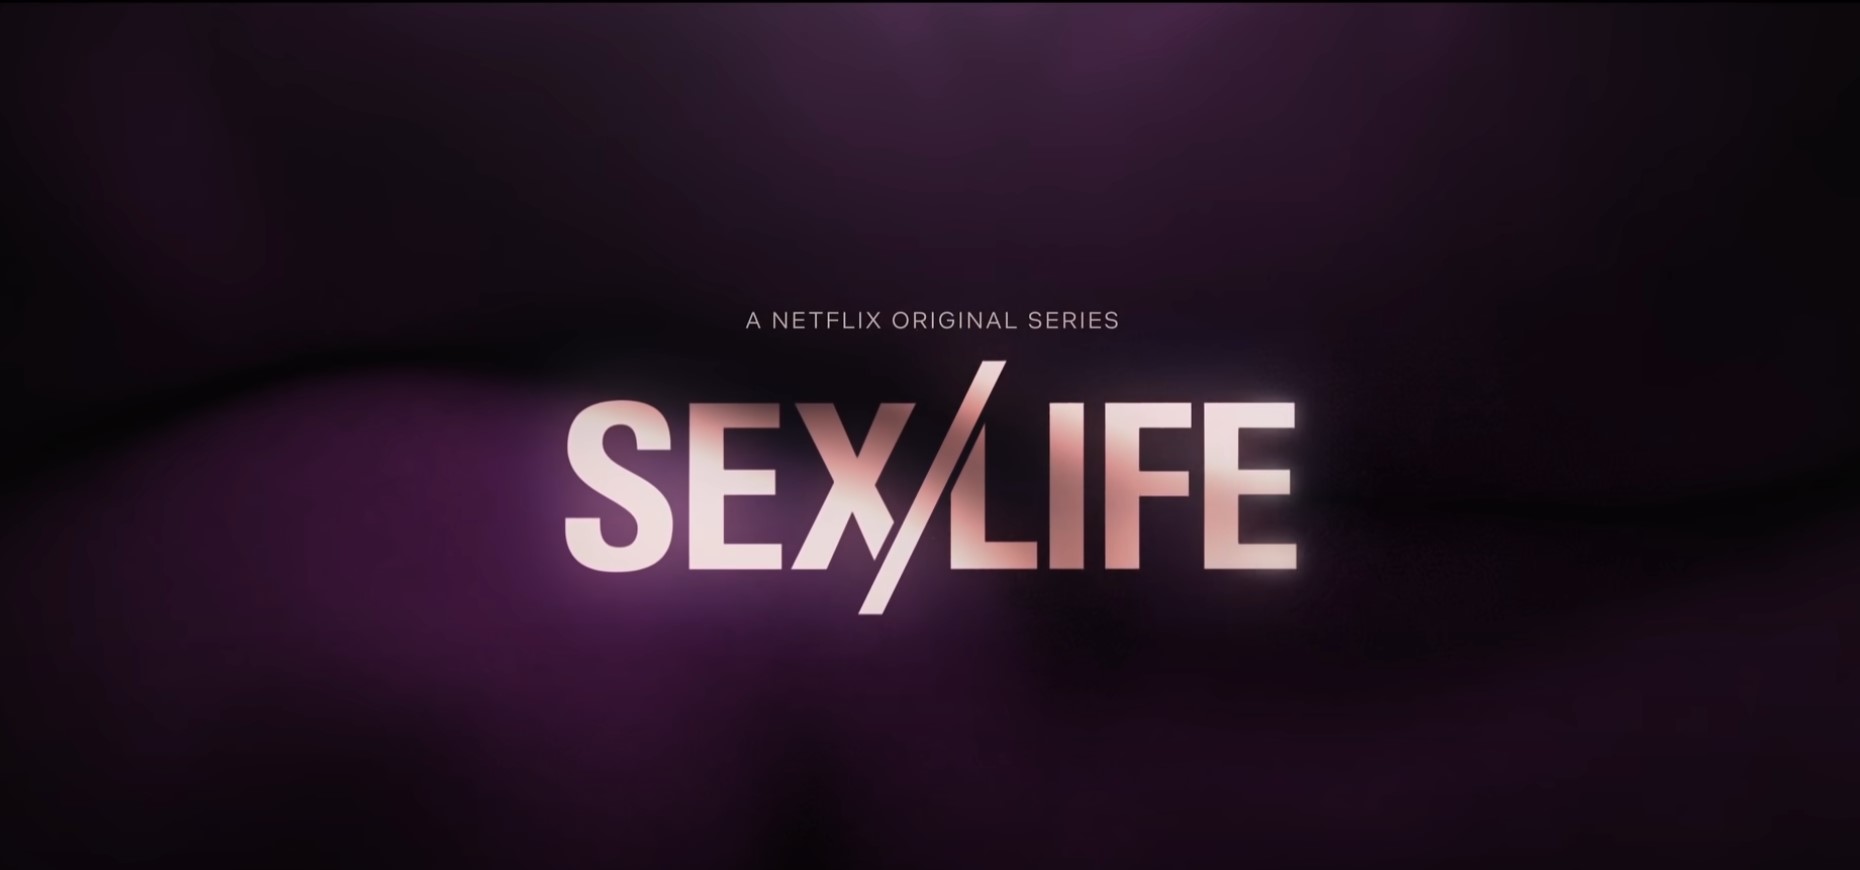 Sex/Life Netflix series | Everything You need to Know!